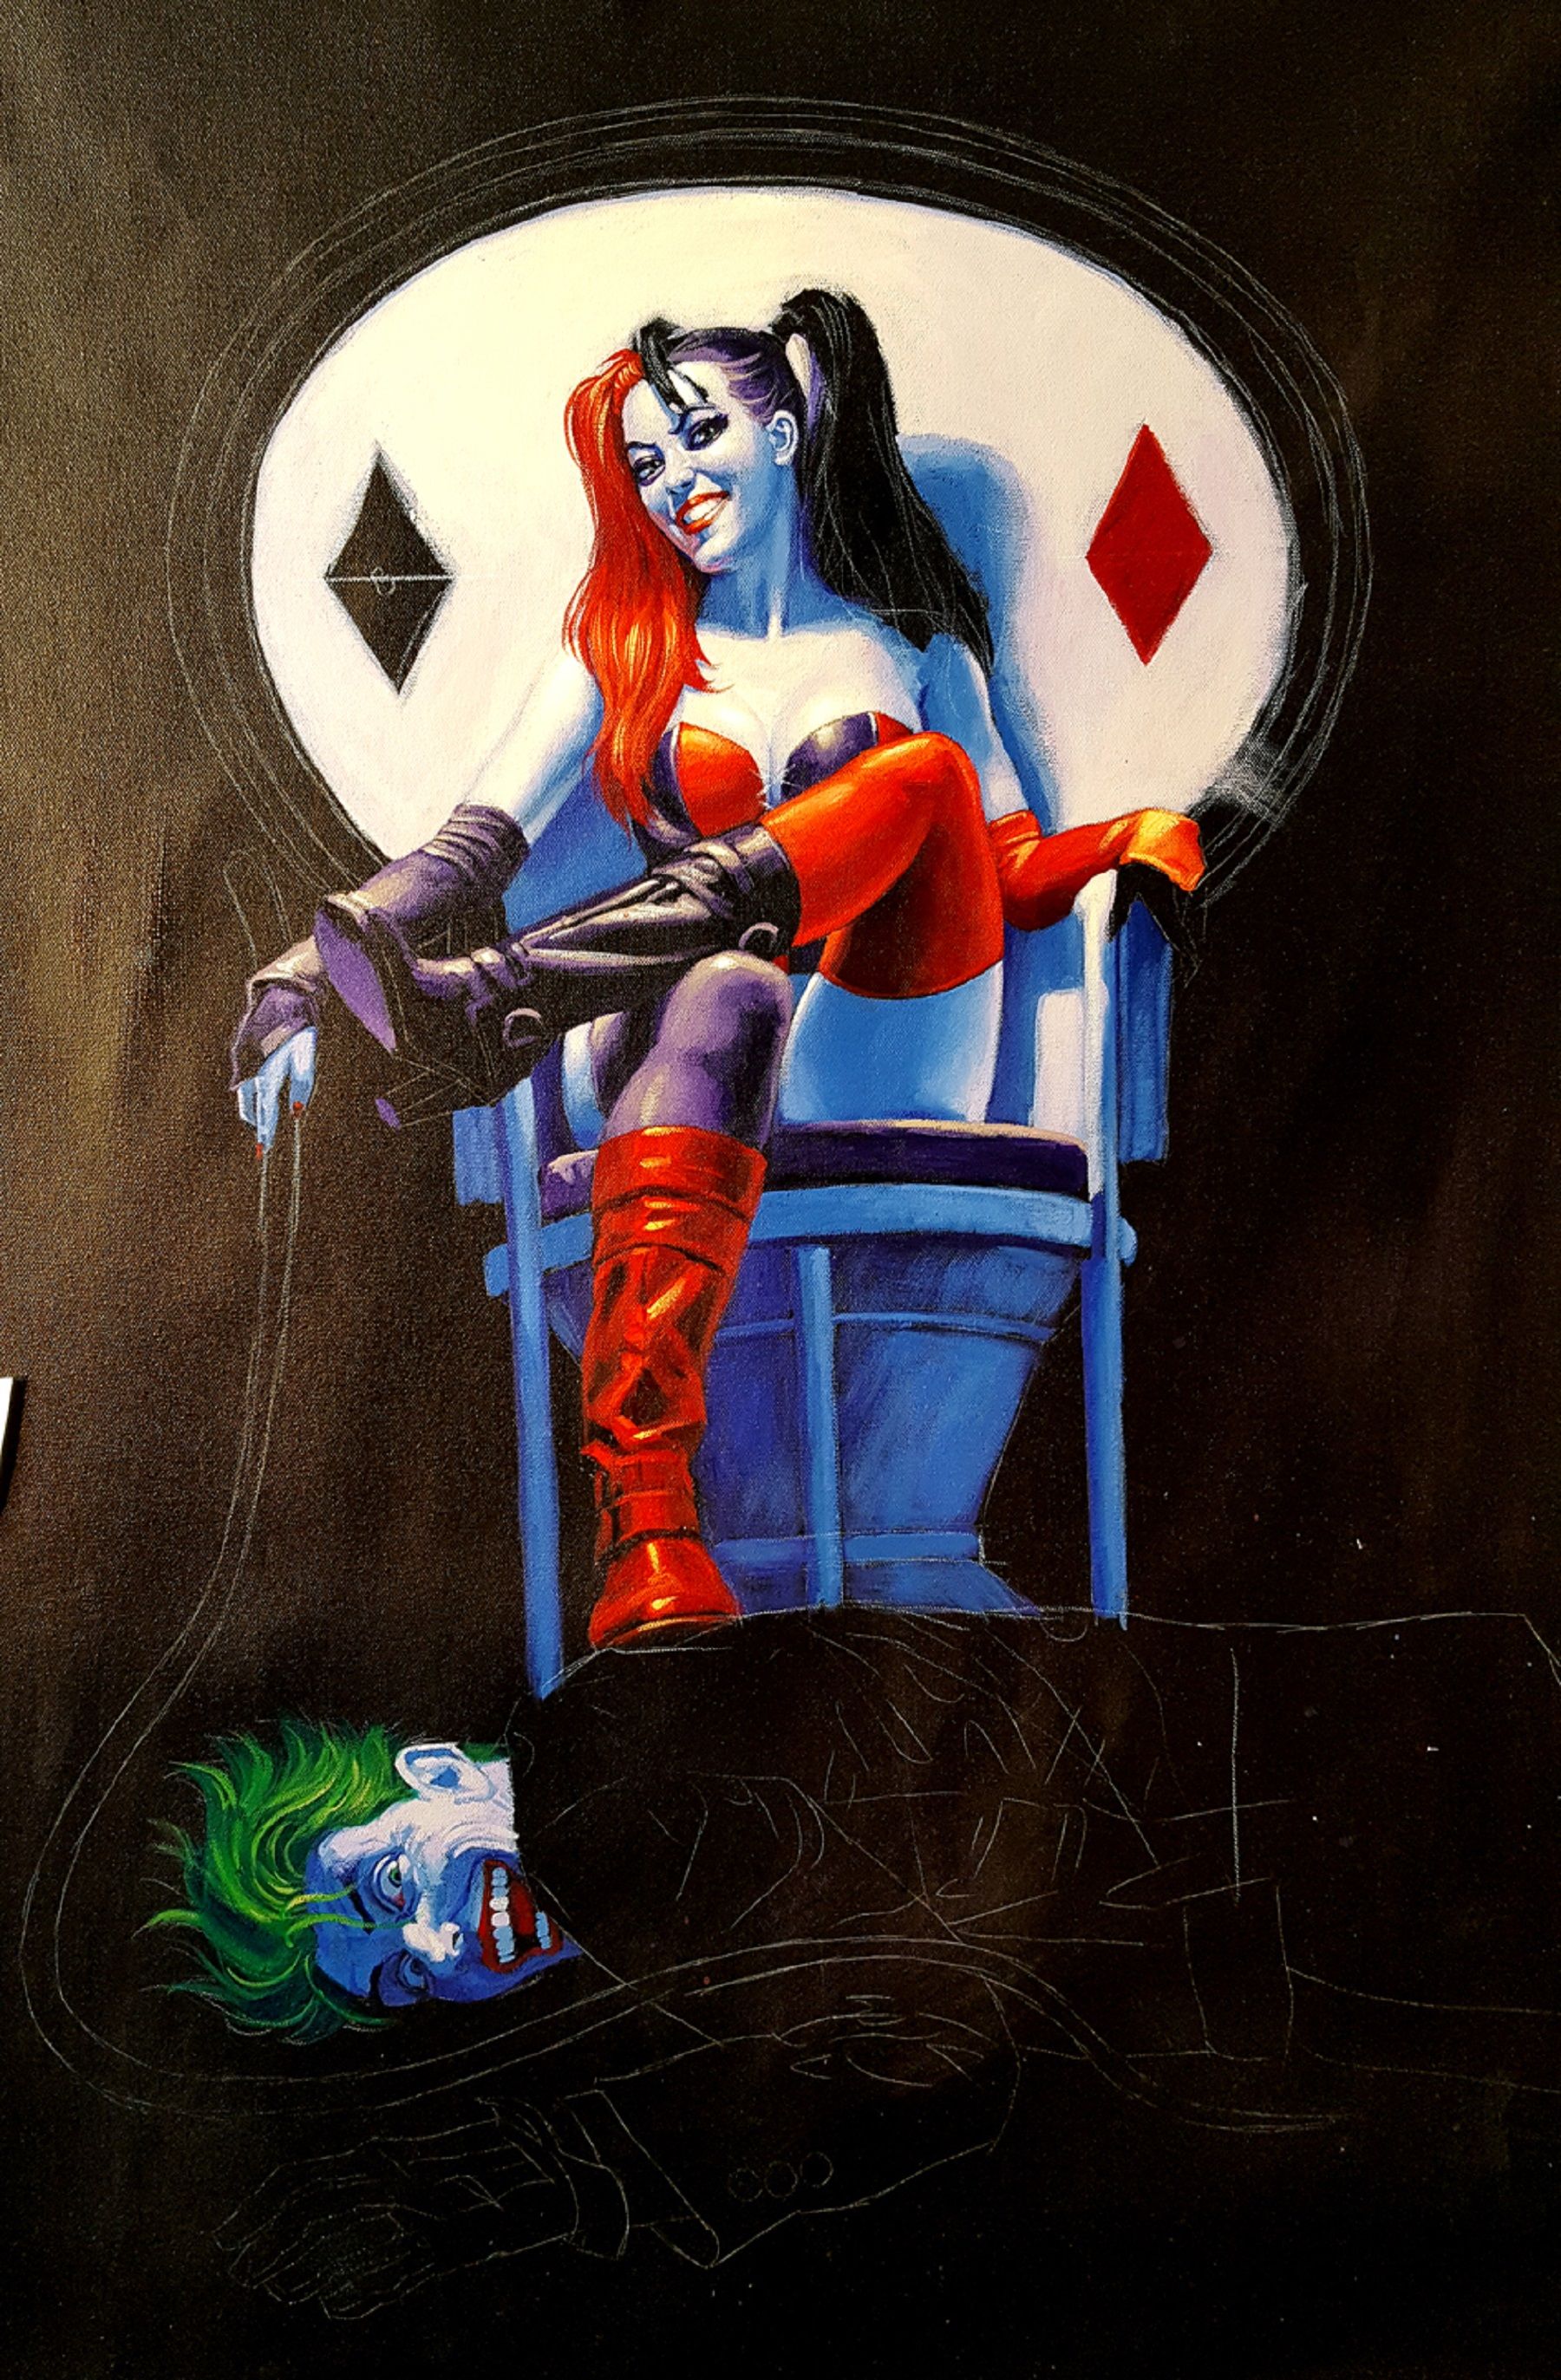 Greg Hildebrandt to Paint Harley Quinn at Live Demonstration in NYC